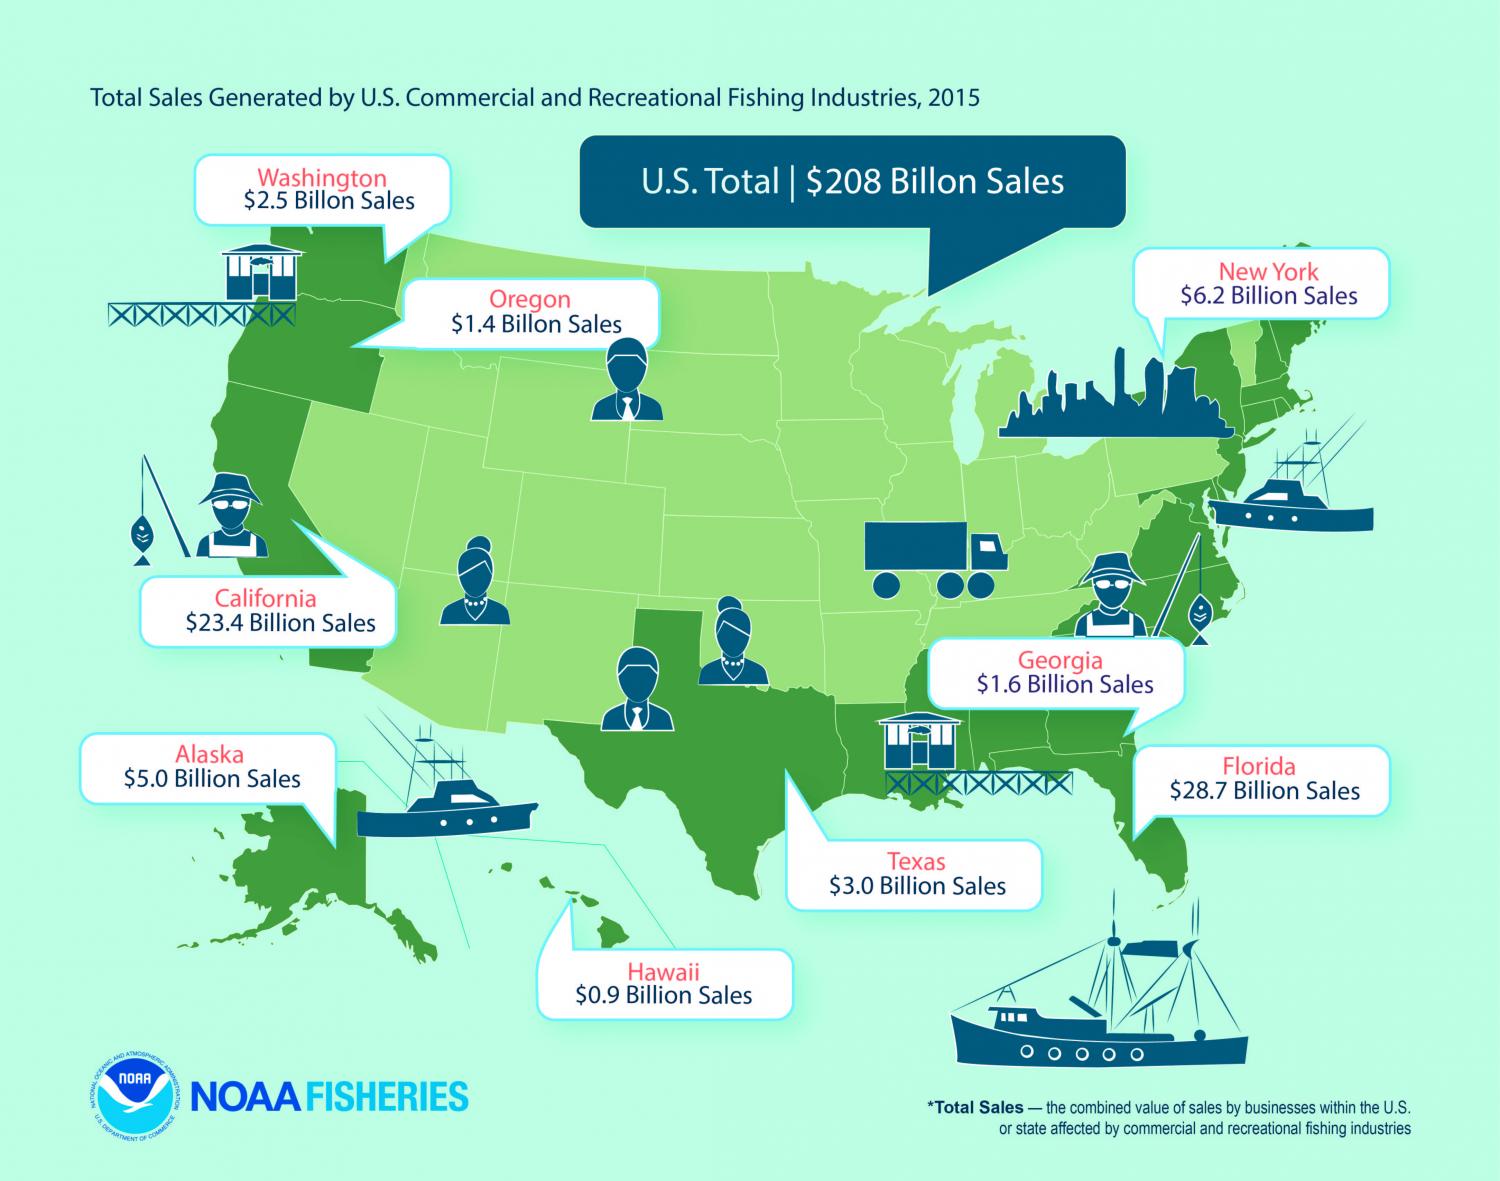 US fishing generated more than $200 billion in sales in 2015; two